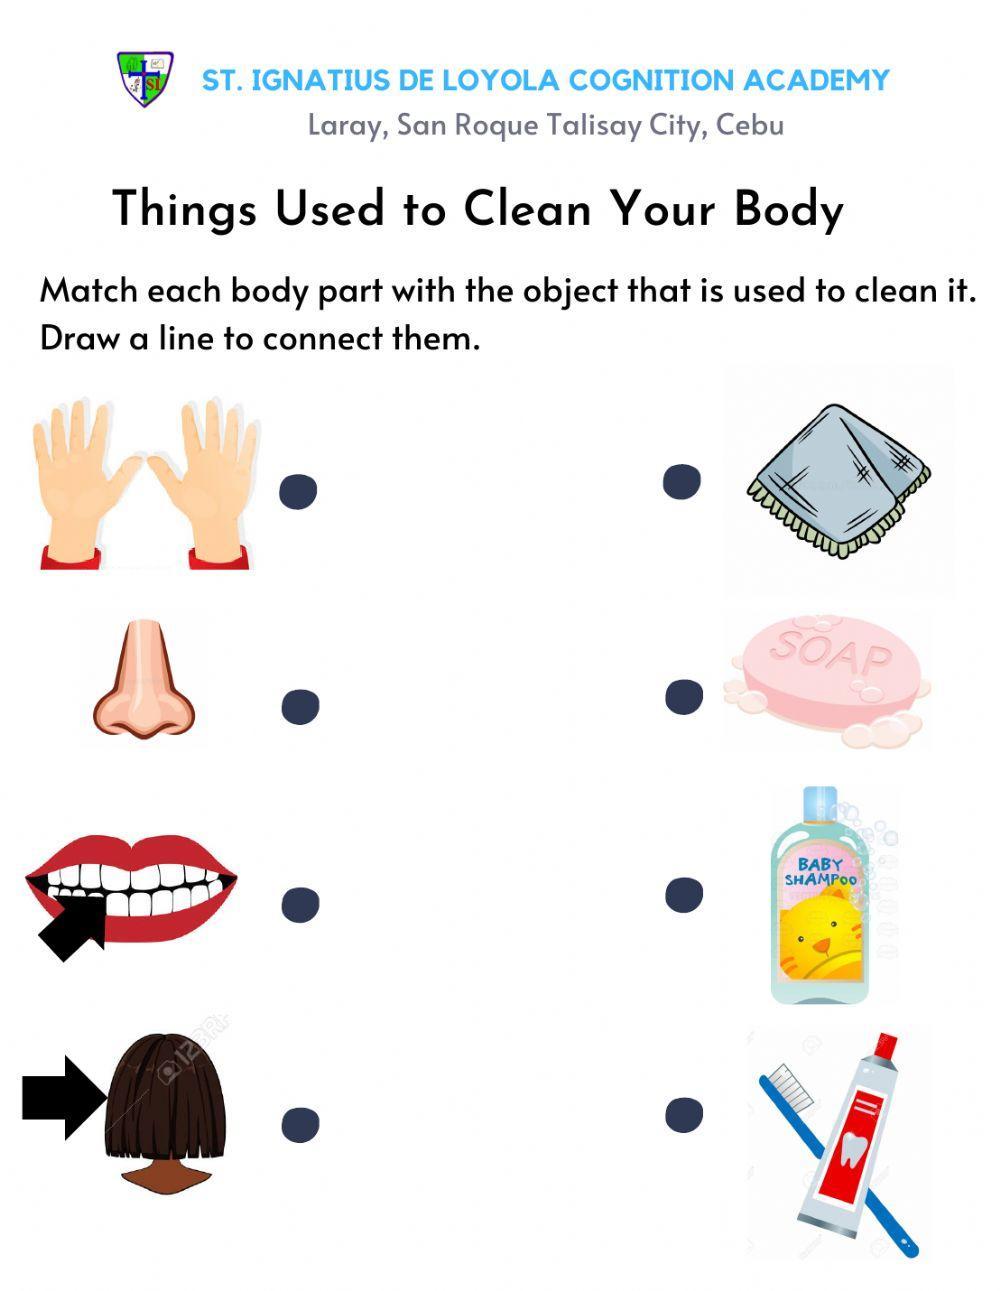 Things used to Clean Your Body